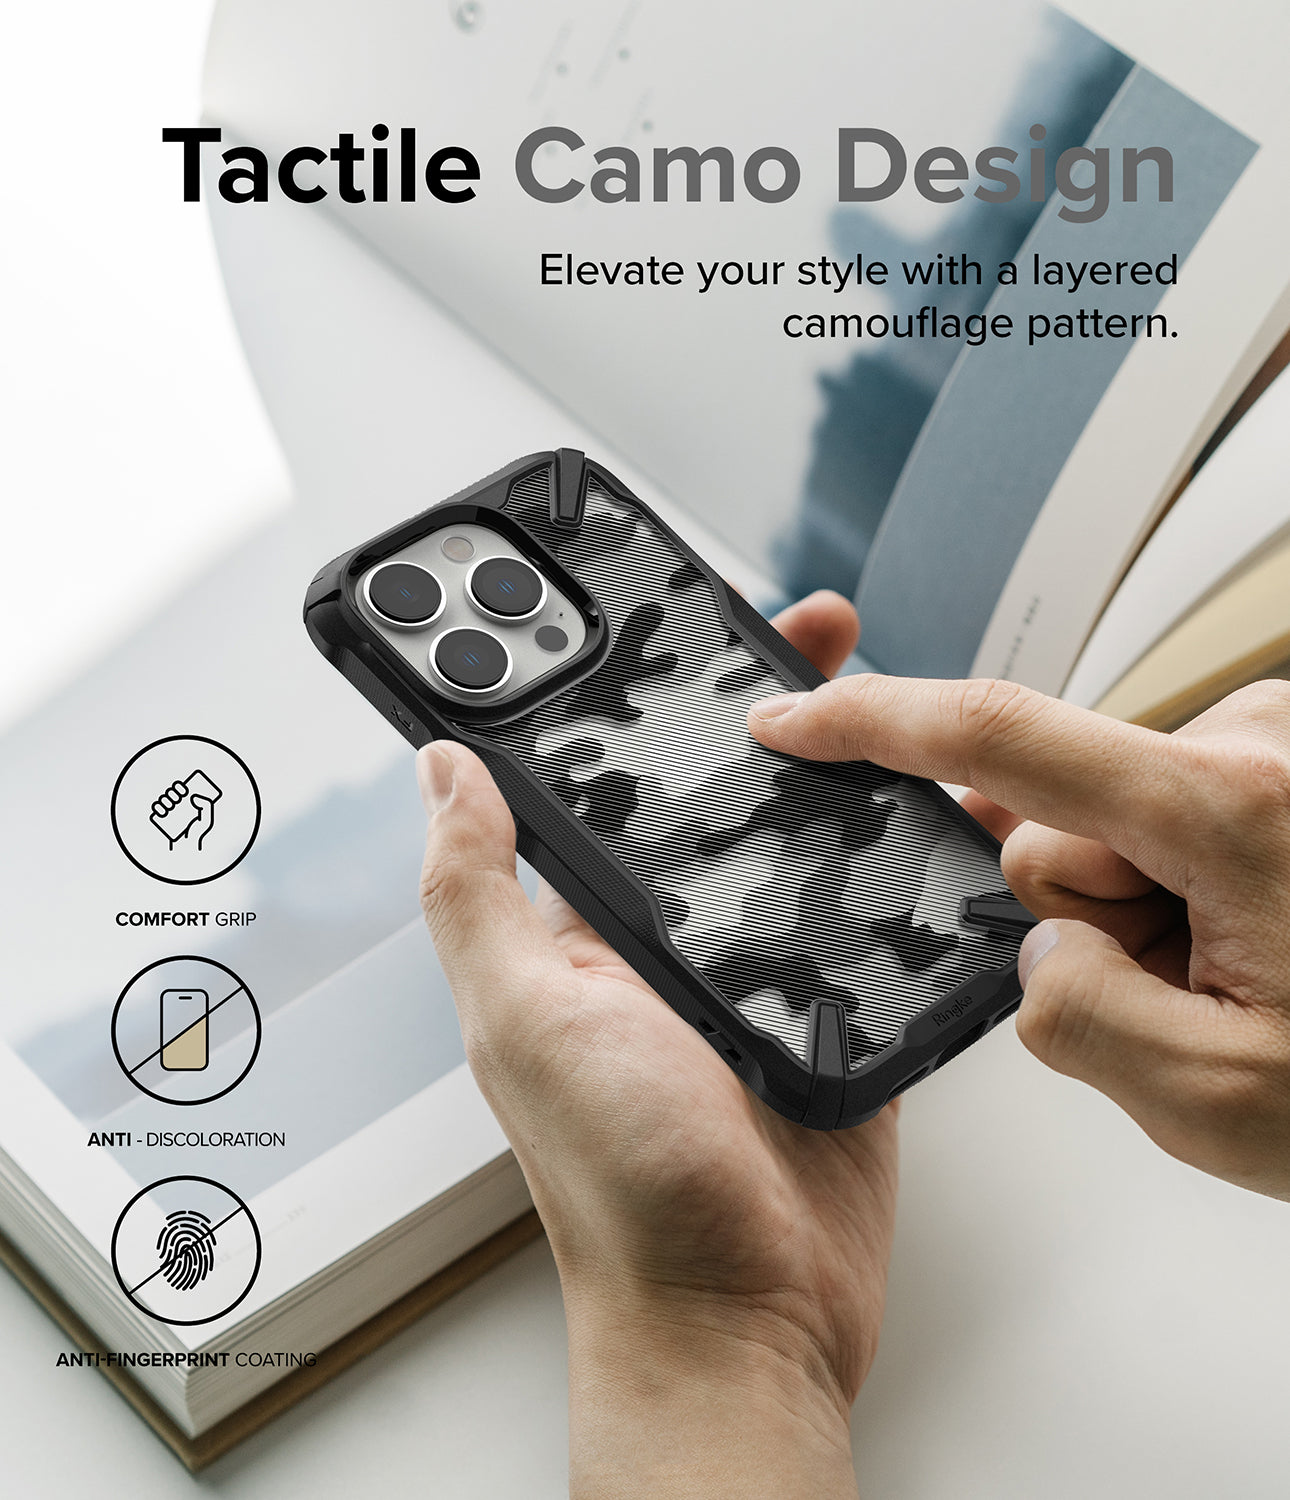 iPhone 14 Pro Max Case | Fusion-X - Camo Black - Tactile Camo Design. Elevate style with a layered camouflage pattern.